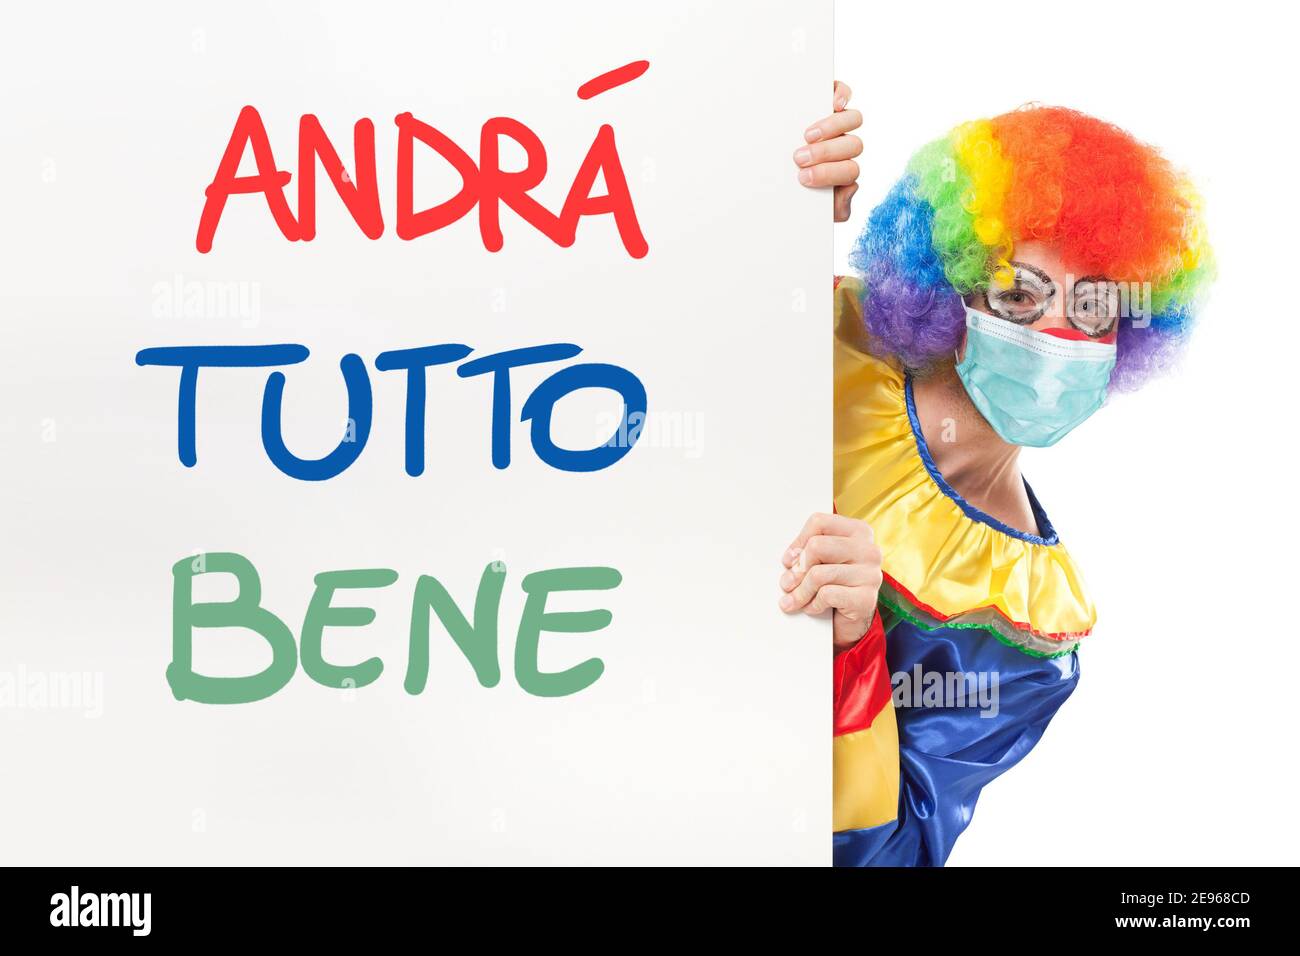 Clown wearing a mask showing a panel with the italian text Andrà tutto bene, which means Everything will be alright. Coronavirus concept Stock Photo